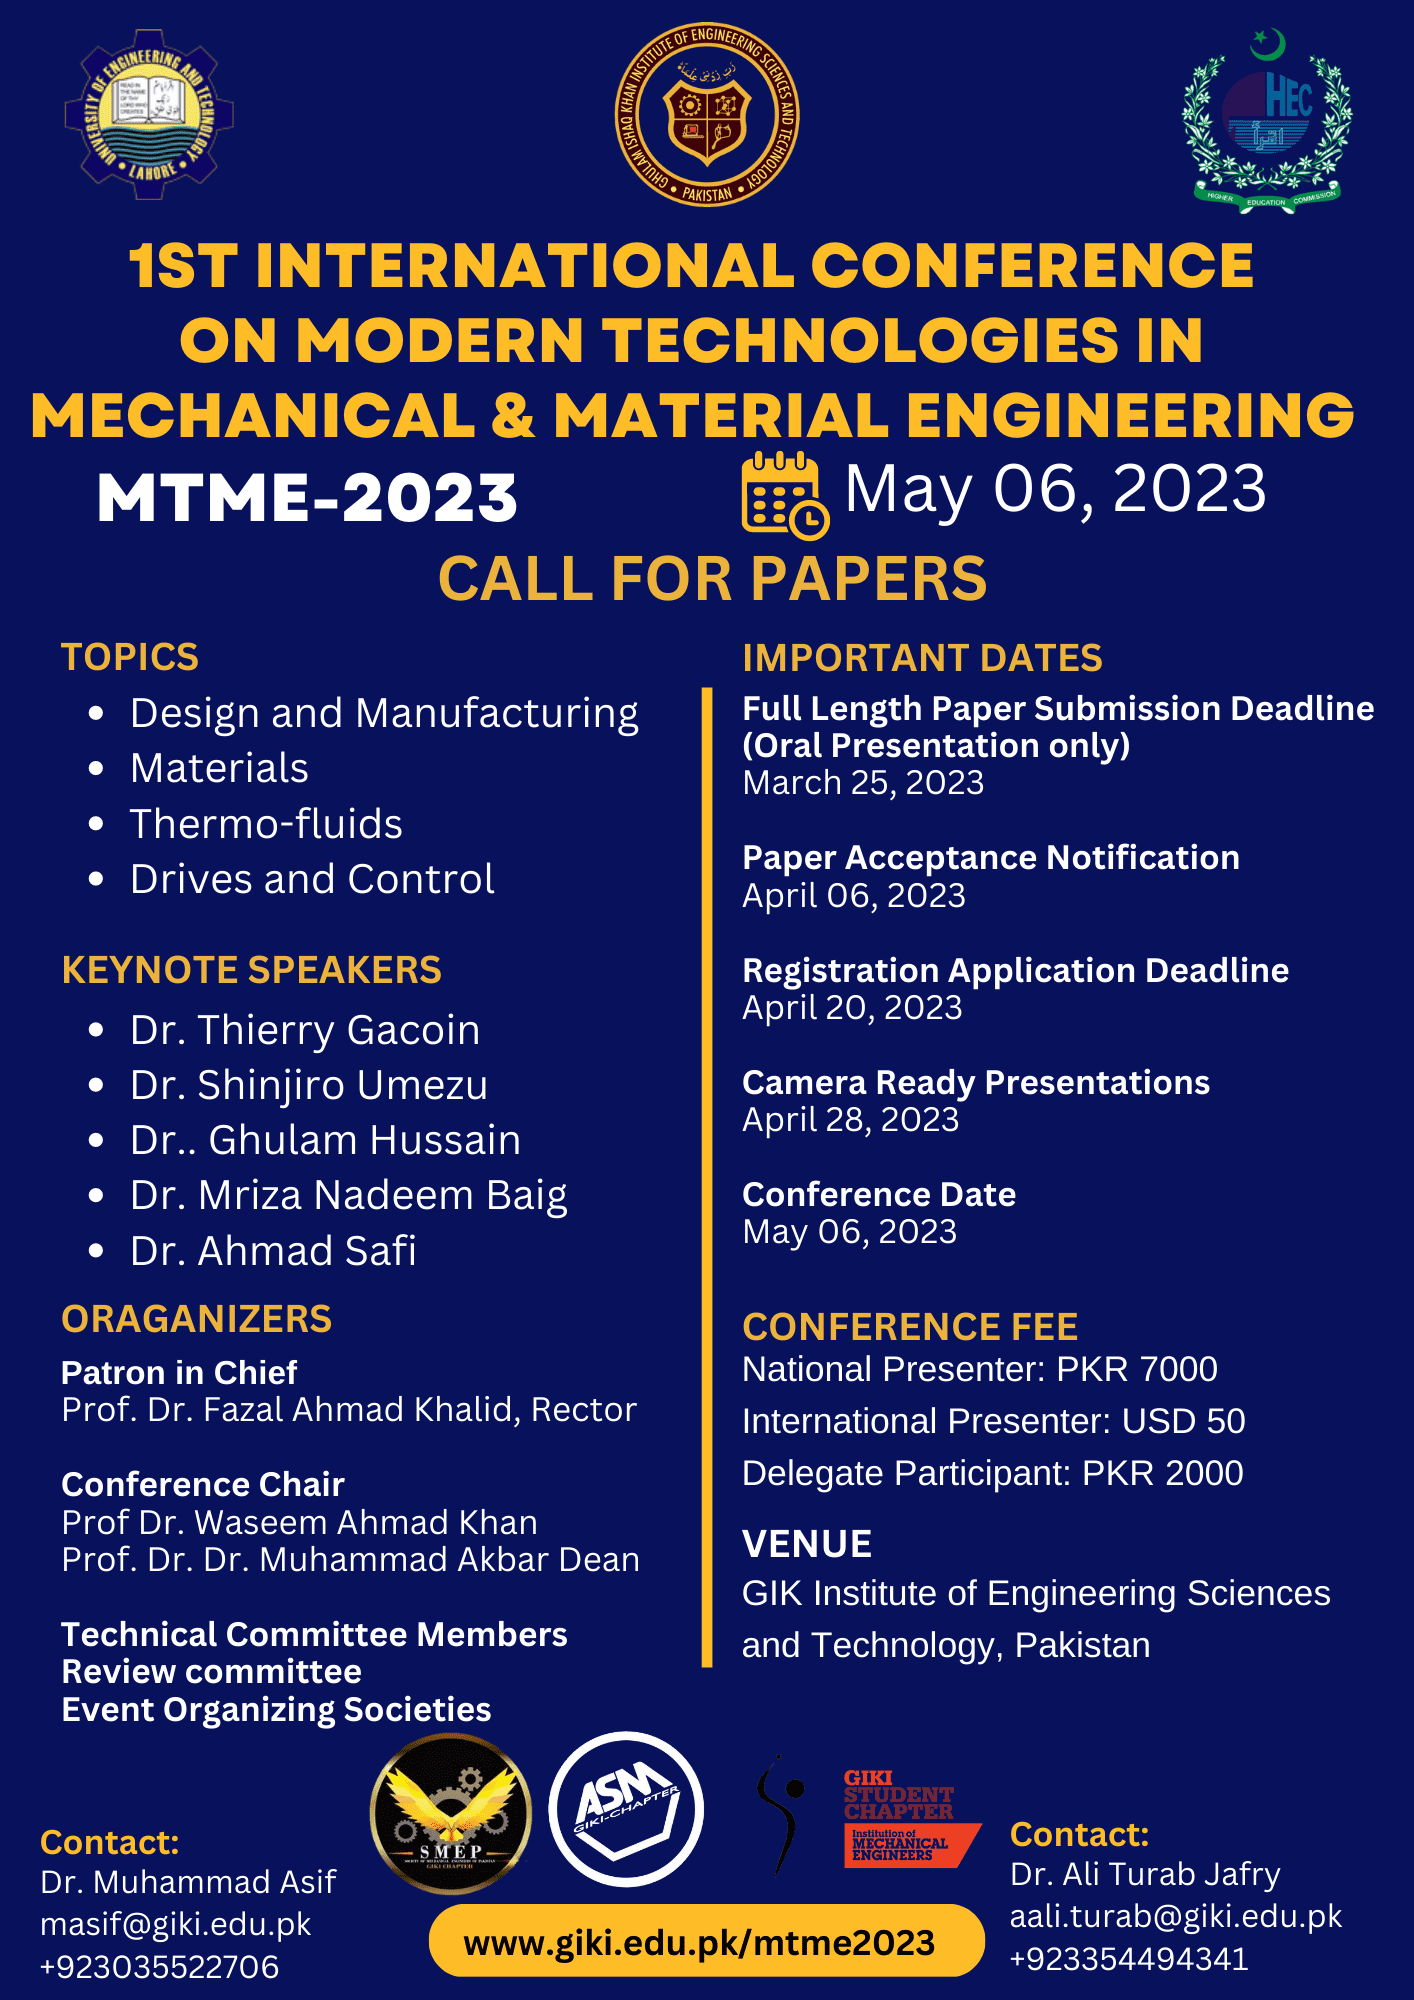 1st International Conference on Modern Technologies in Mechanical & Material Engineering